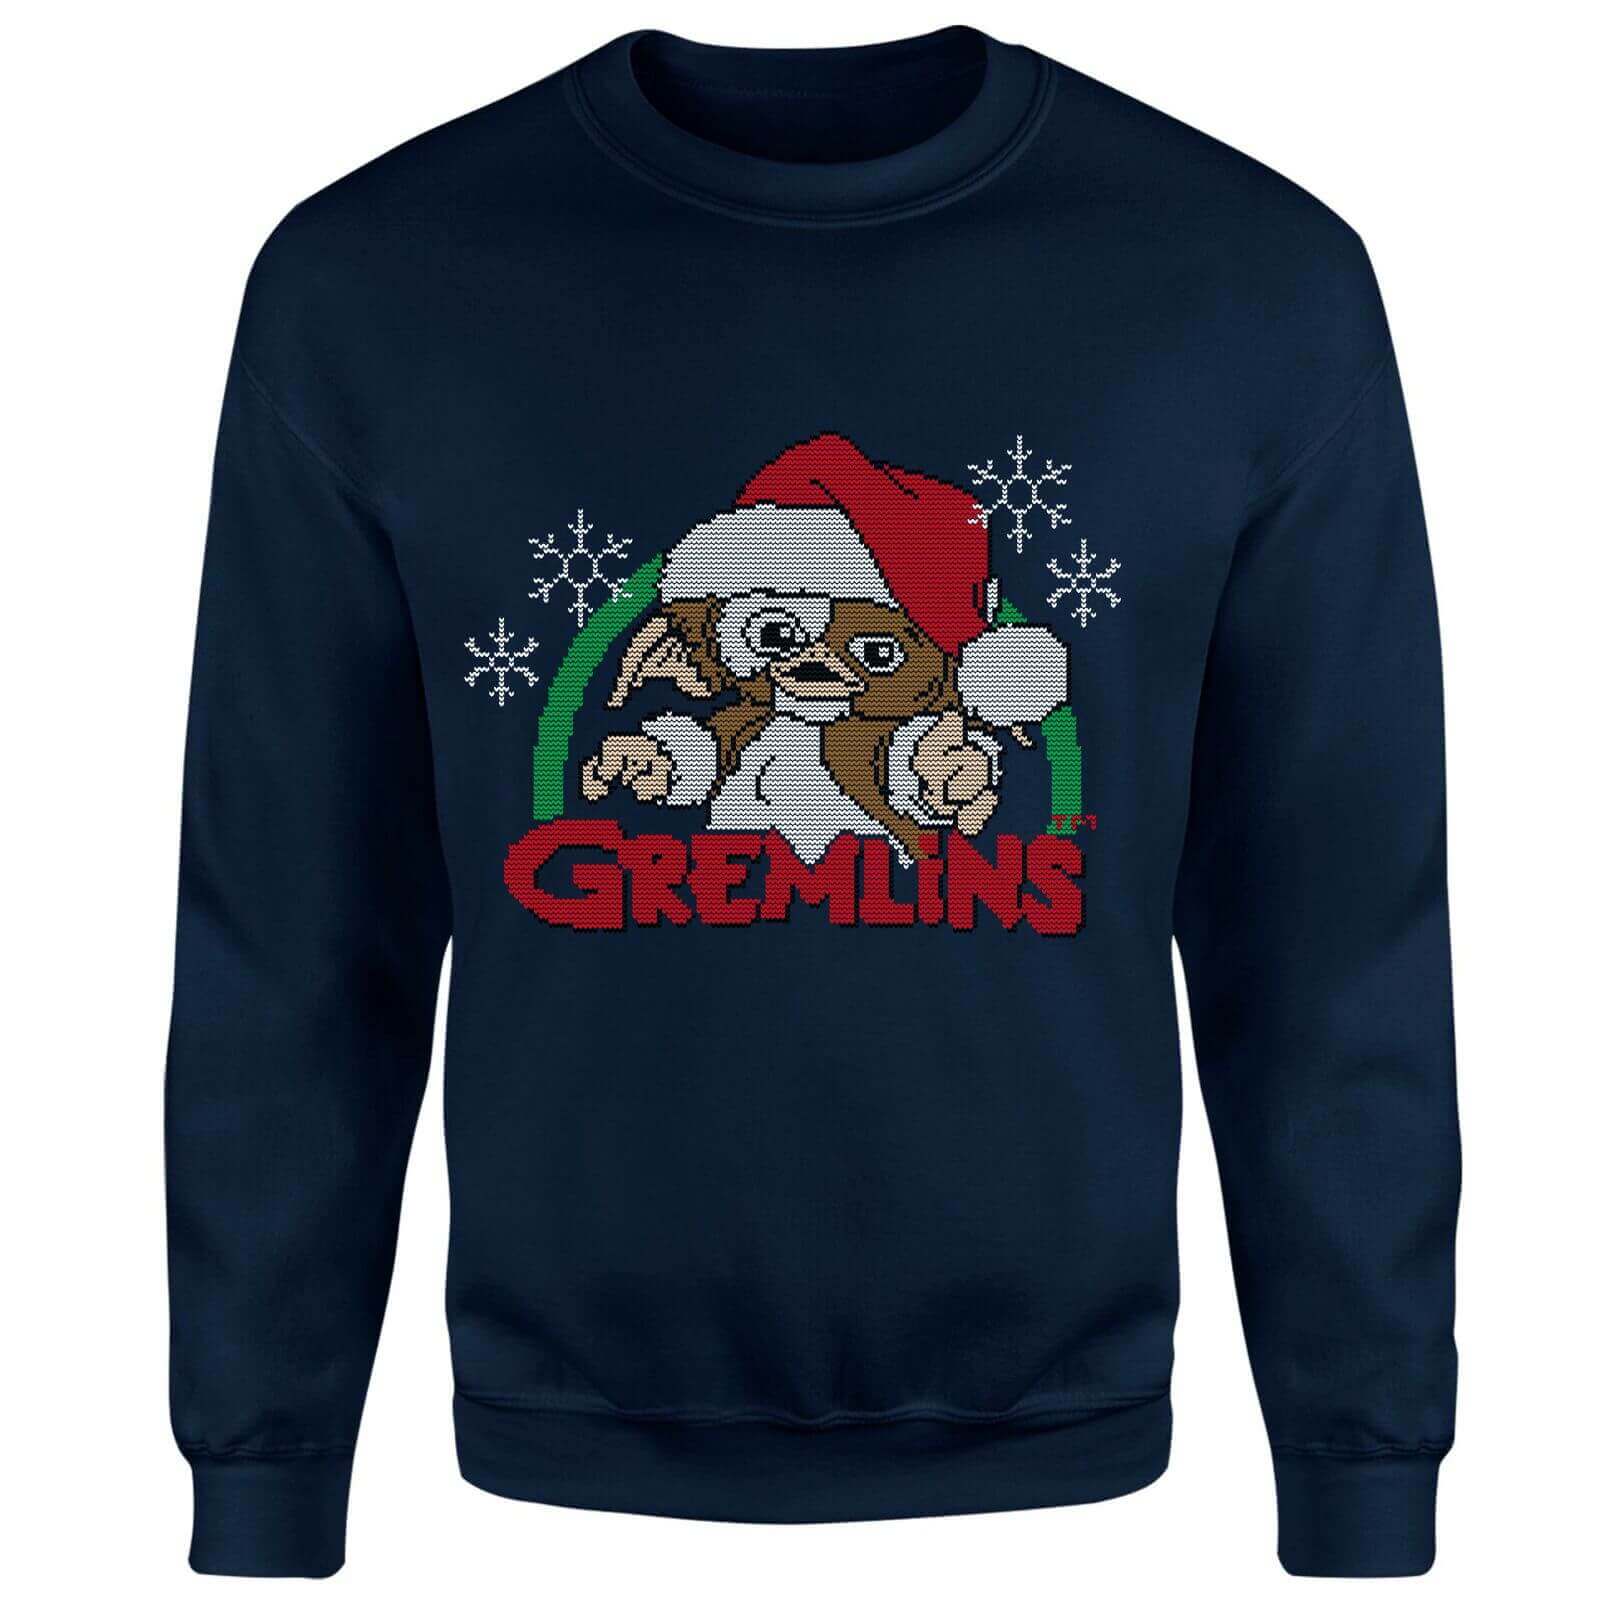 Gremlins Another Reason To Hate Christmas Jumper - Navy - XXL - Navy